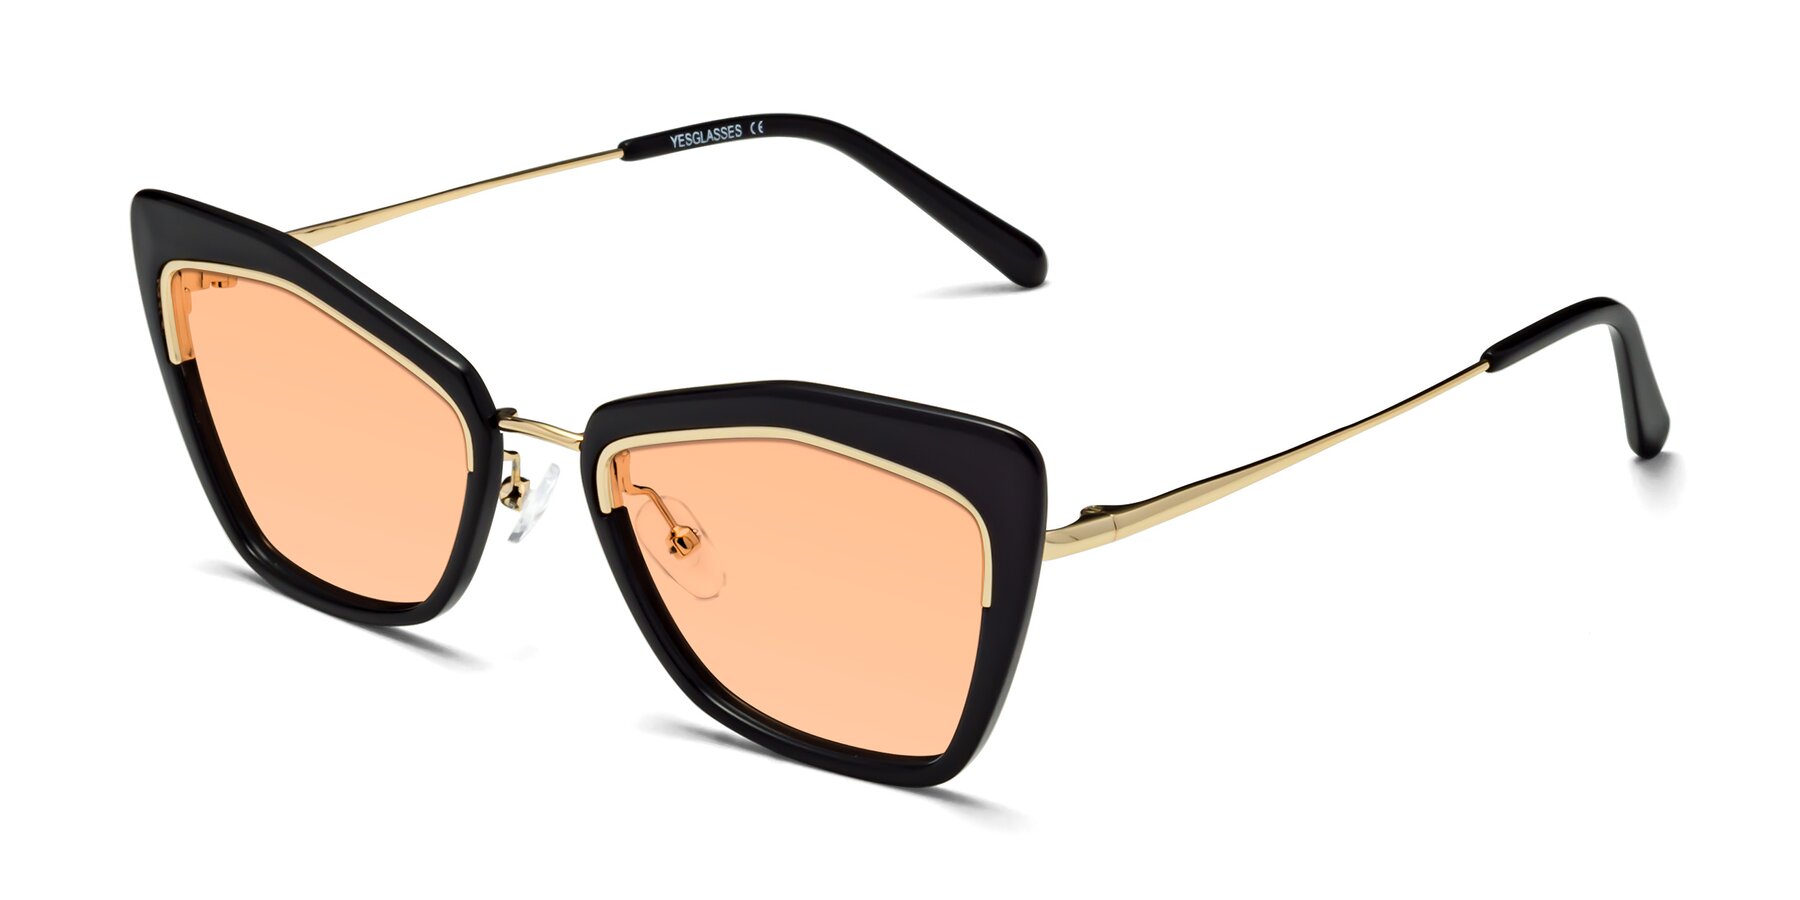 Angle of Lasso in Black with Light Orange Tinted Lenses